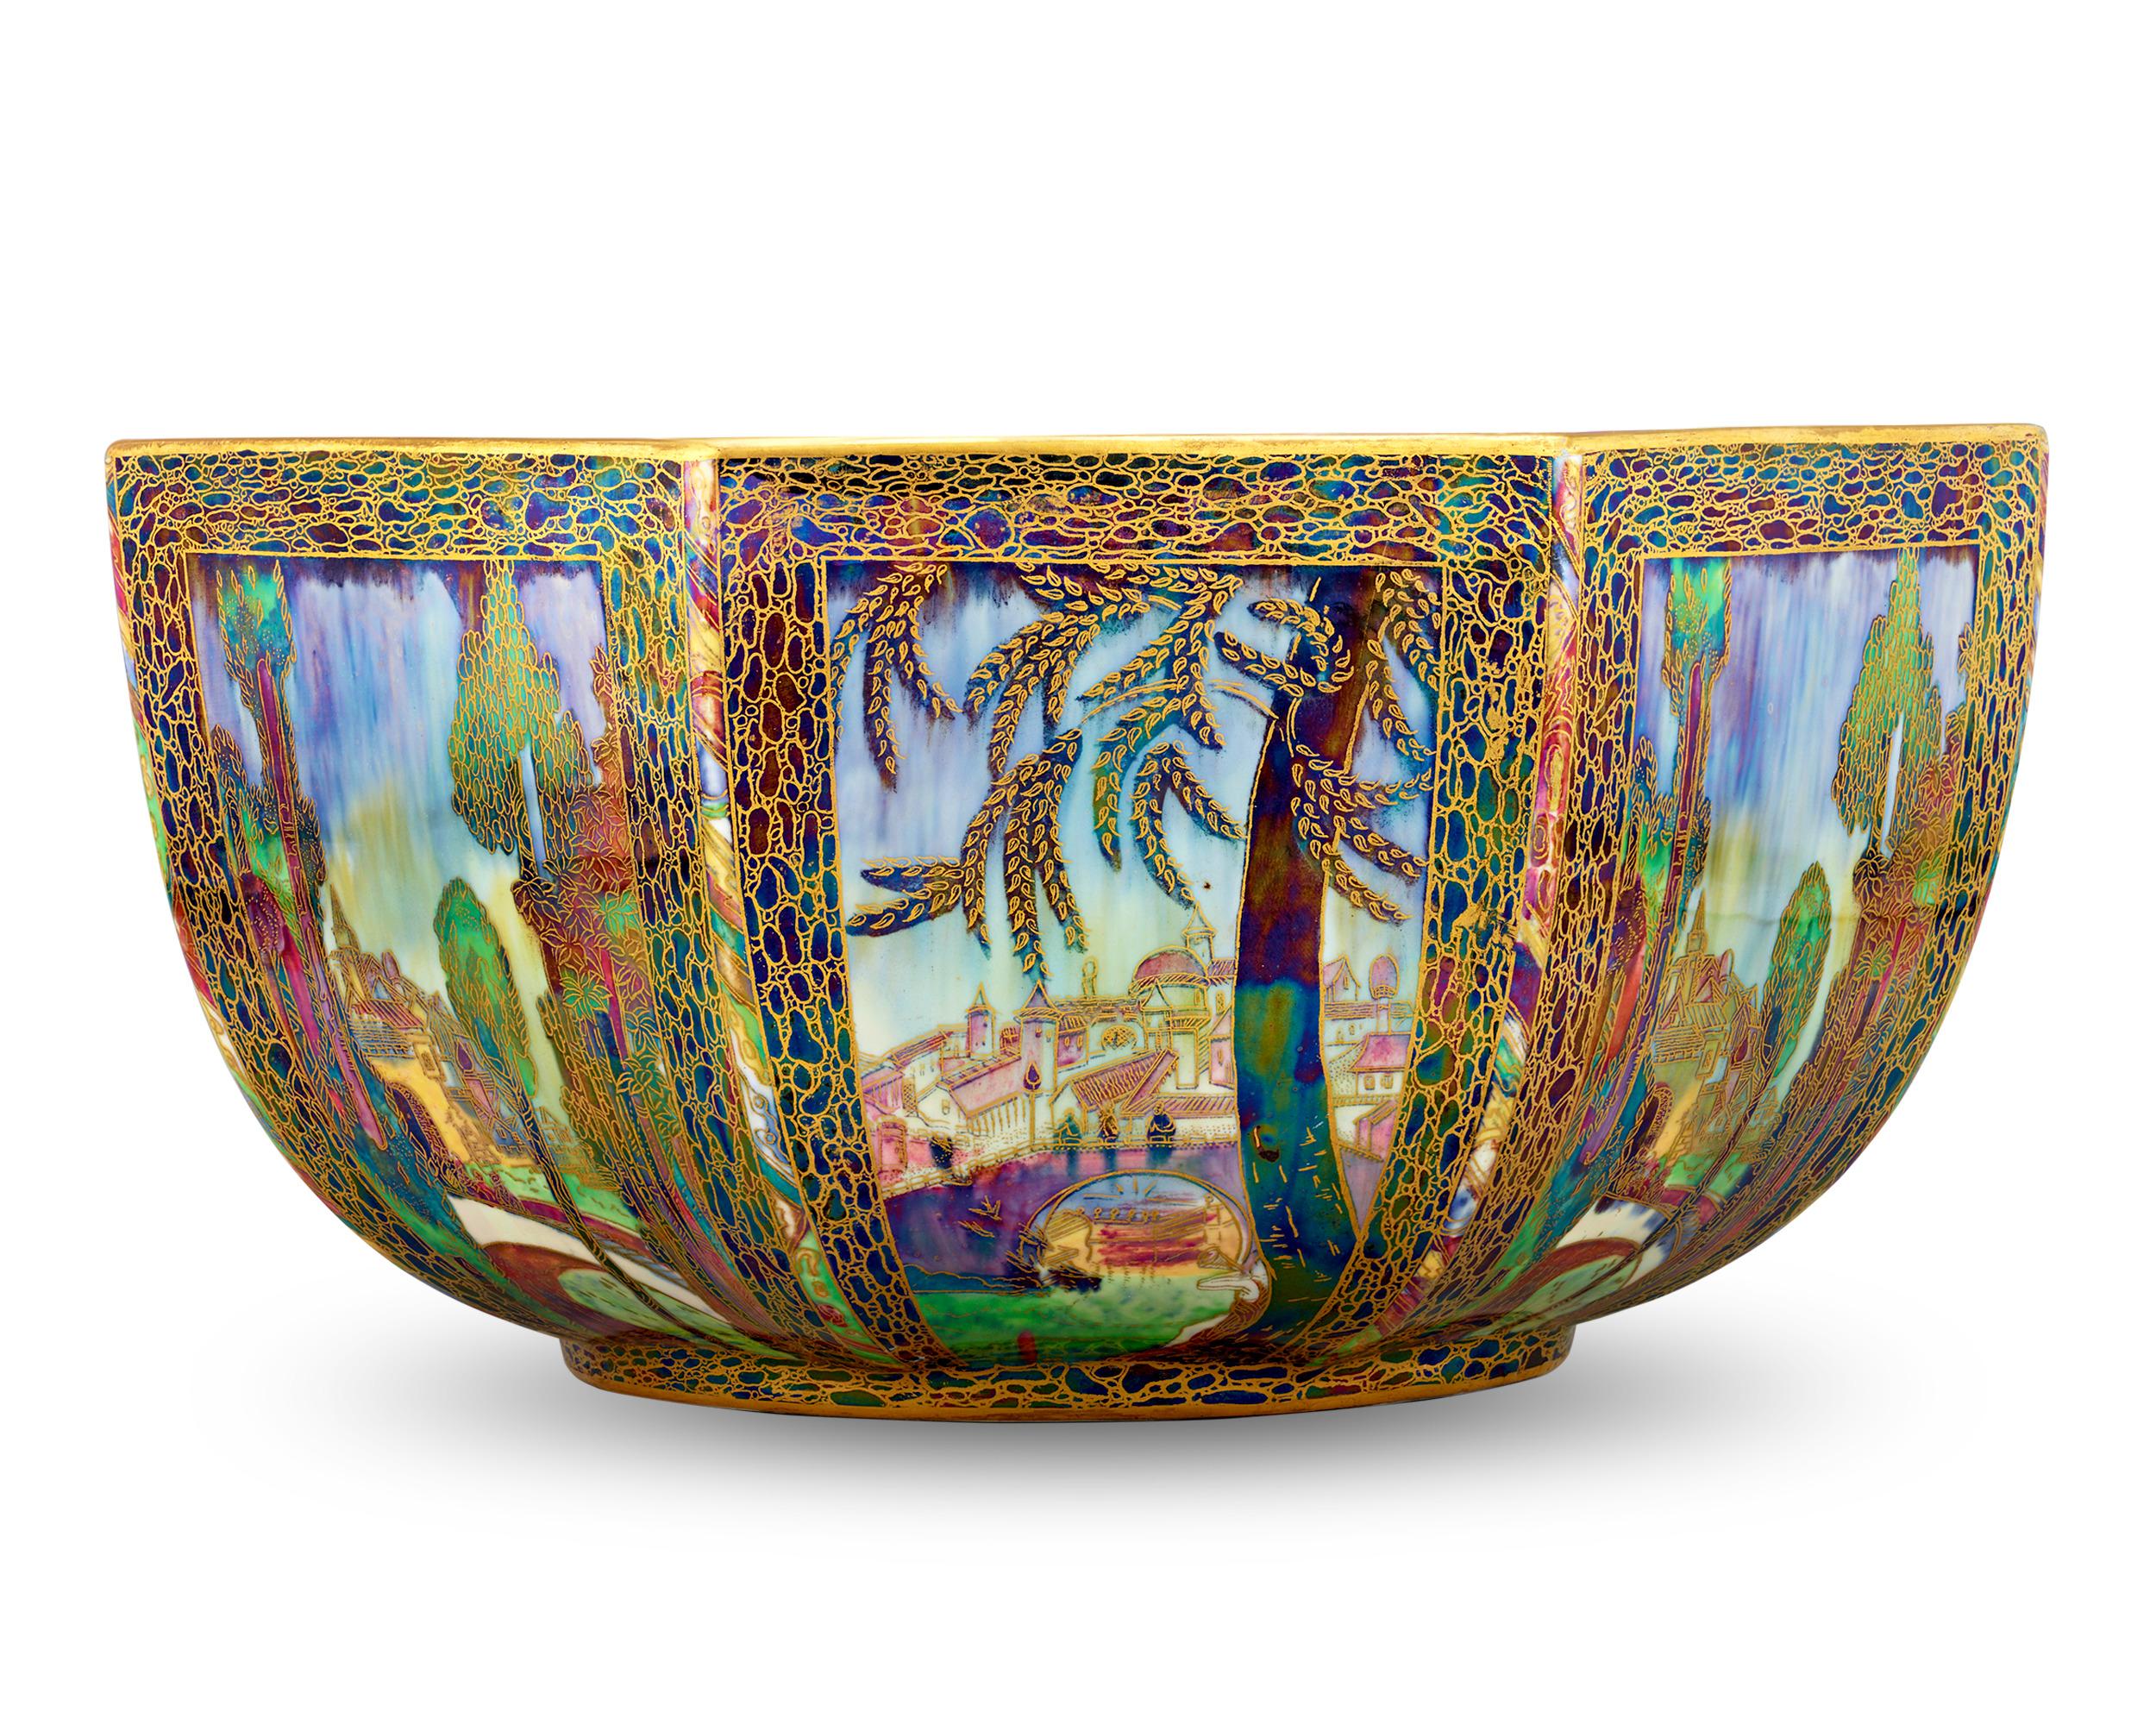 This rare Wedgwood Fairyland Lustre octagon bowl designed by Daisy Makeig-Jones exudes the timeless whimsy of the Fairyland line. Exhibiting fiery colors and scenes from a fantastical world, the octagonal design features a beautiful combination of